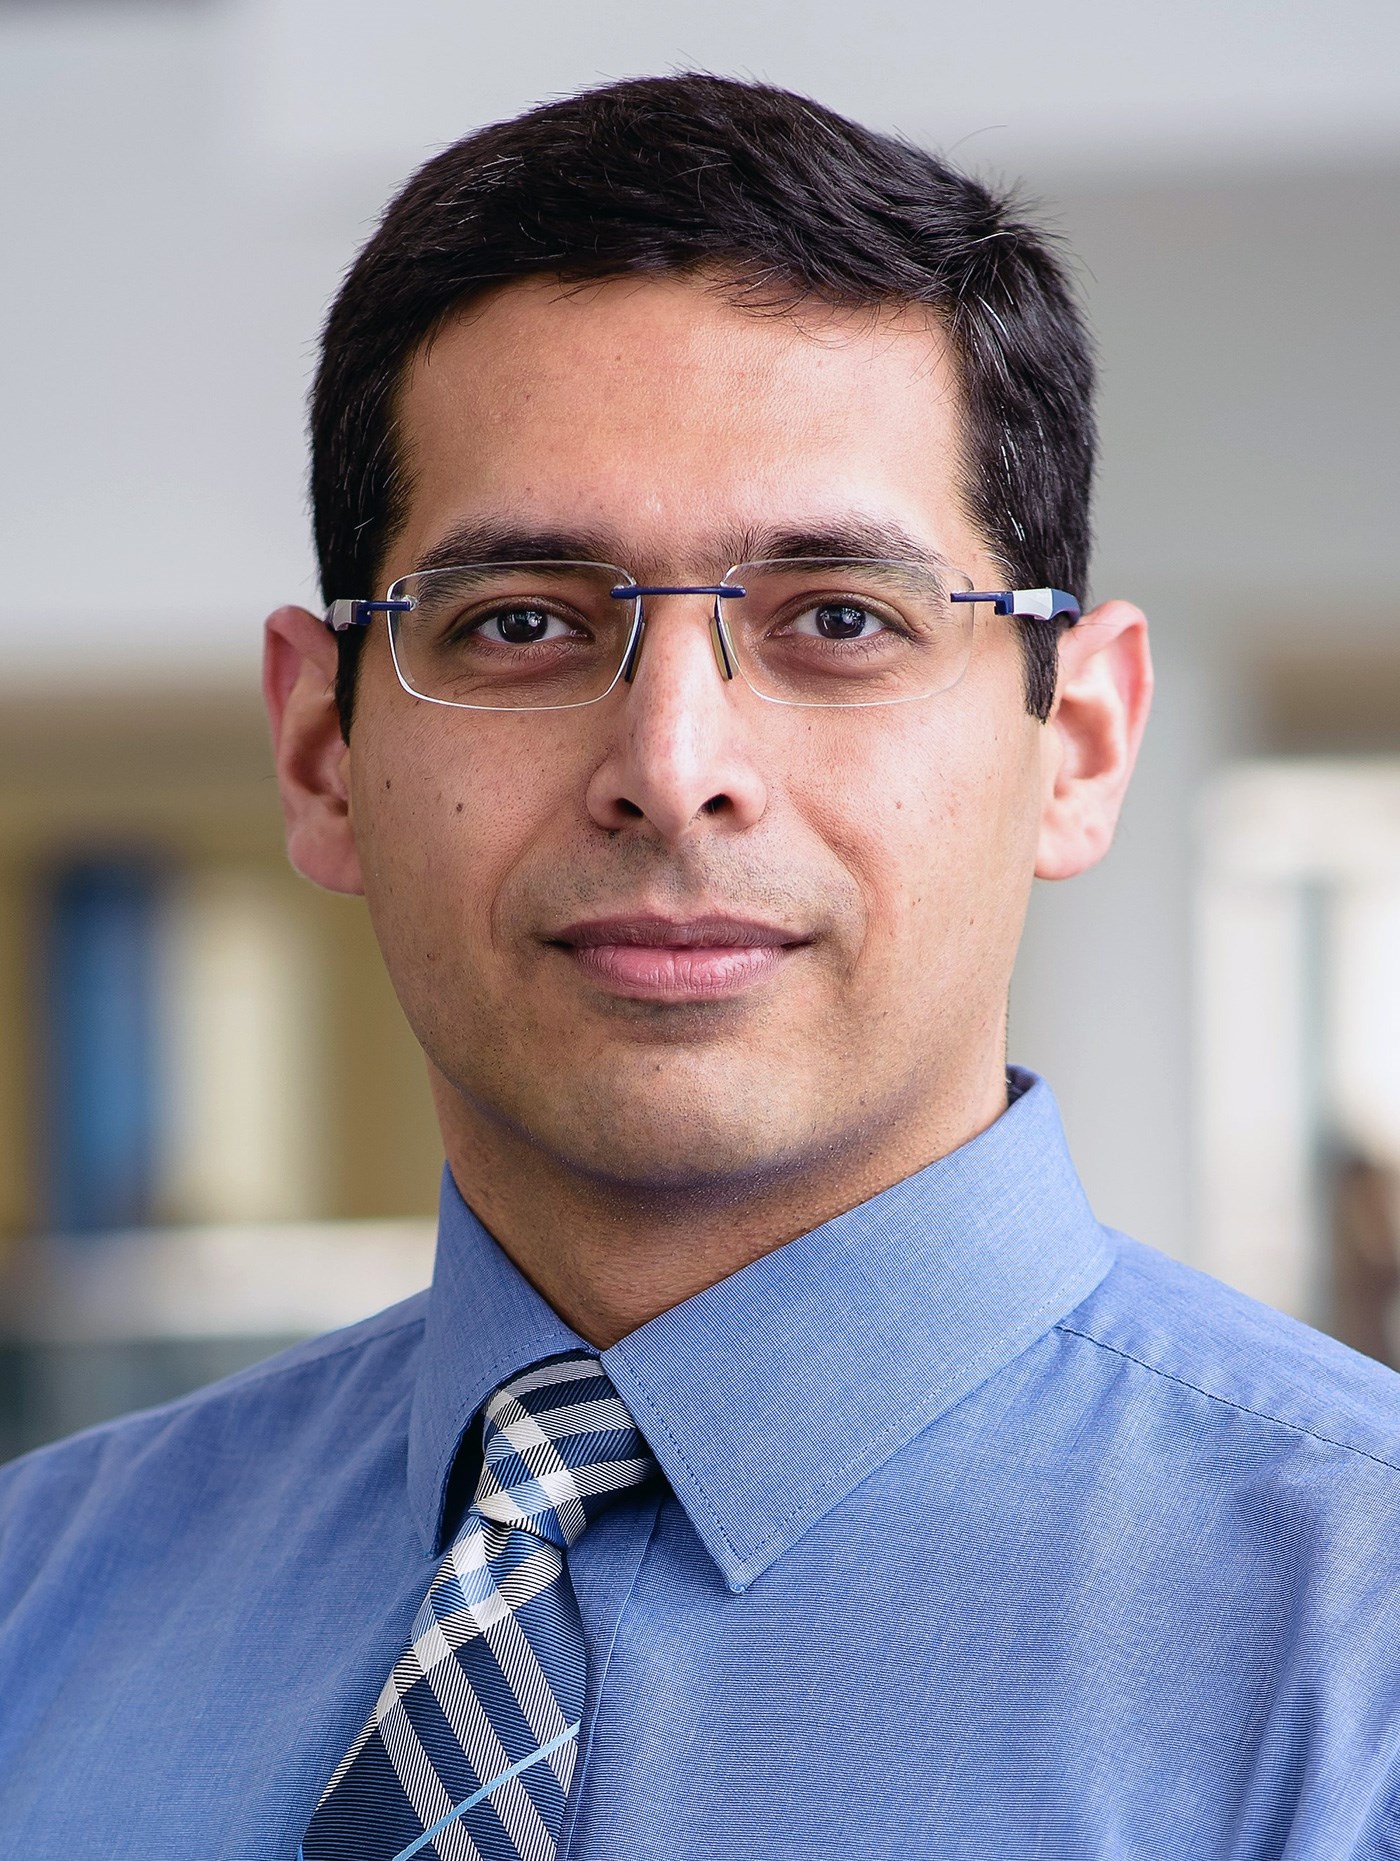 IMAGE OF Kshitij Jerath. Kshitij is an Assistant Professor in the Mechanical Engineering Dept. at UMass Lowell.